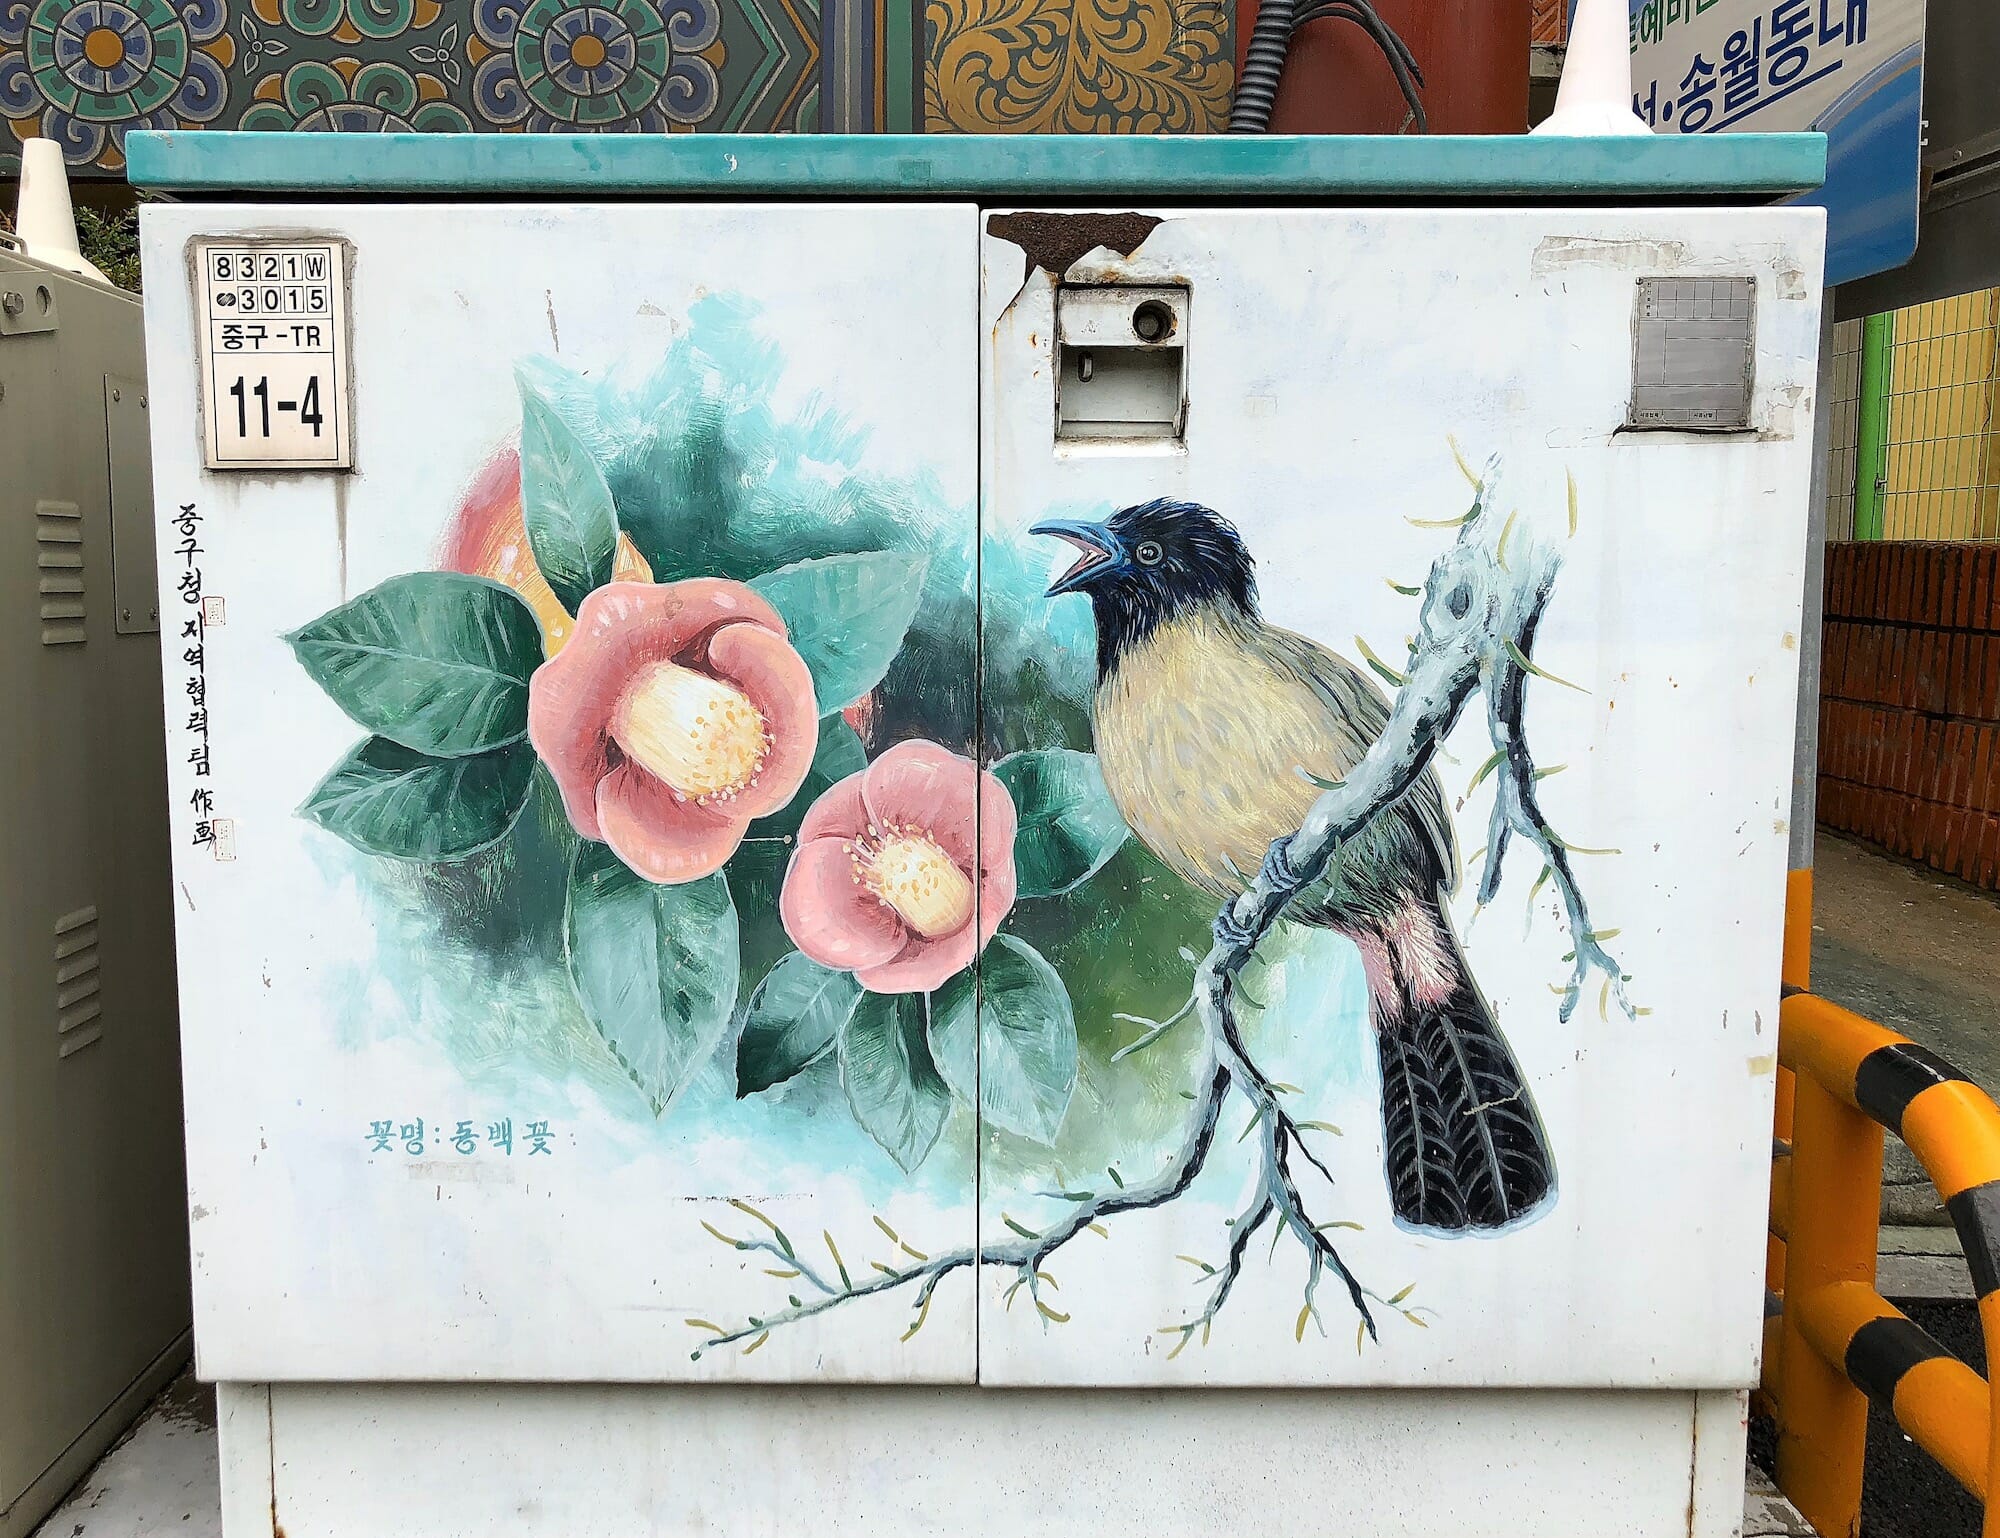 Street Art in Incheon South Korea depicting a bird and flowers